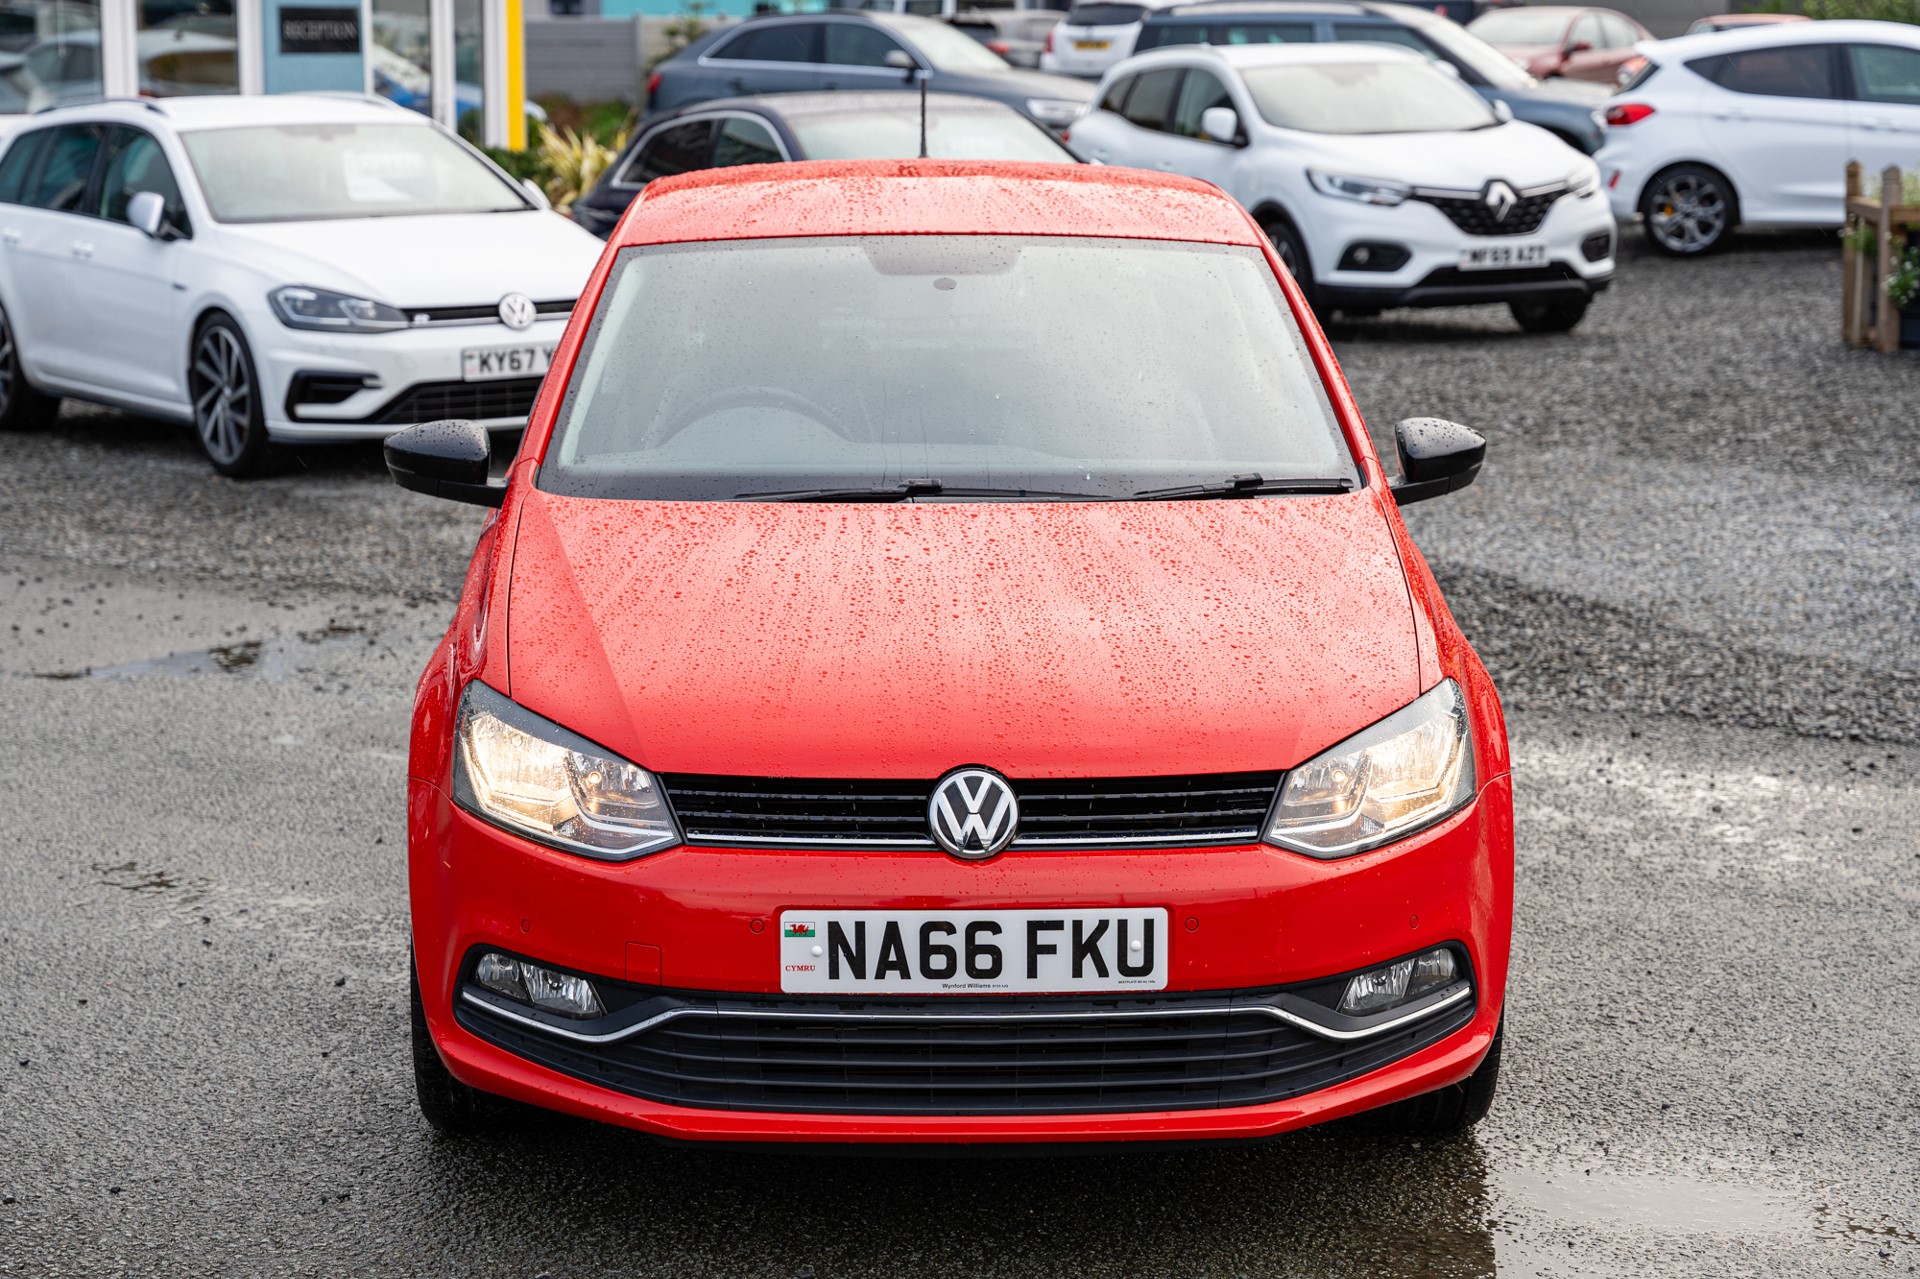 Used Volkswagen Polo for sale in Aberystwyth, Ceredigion